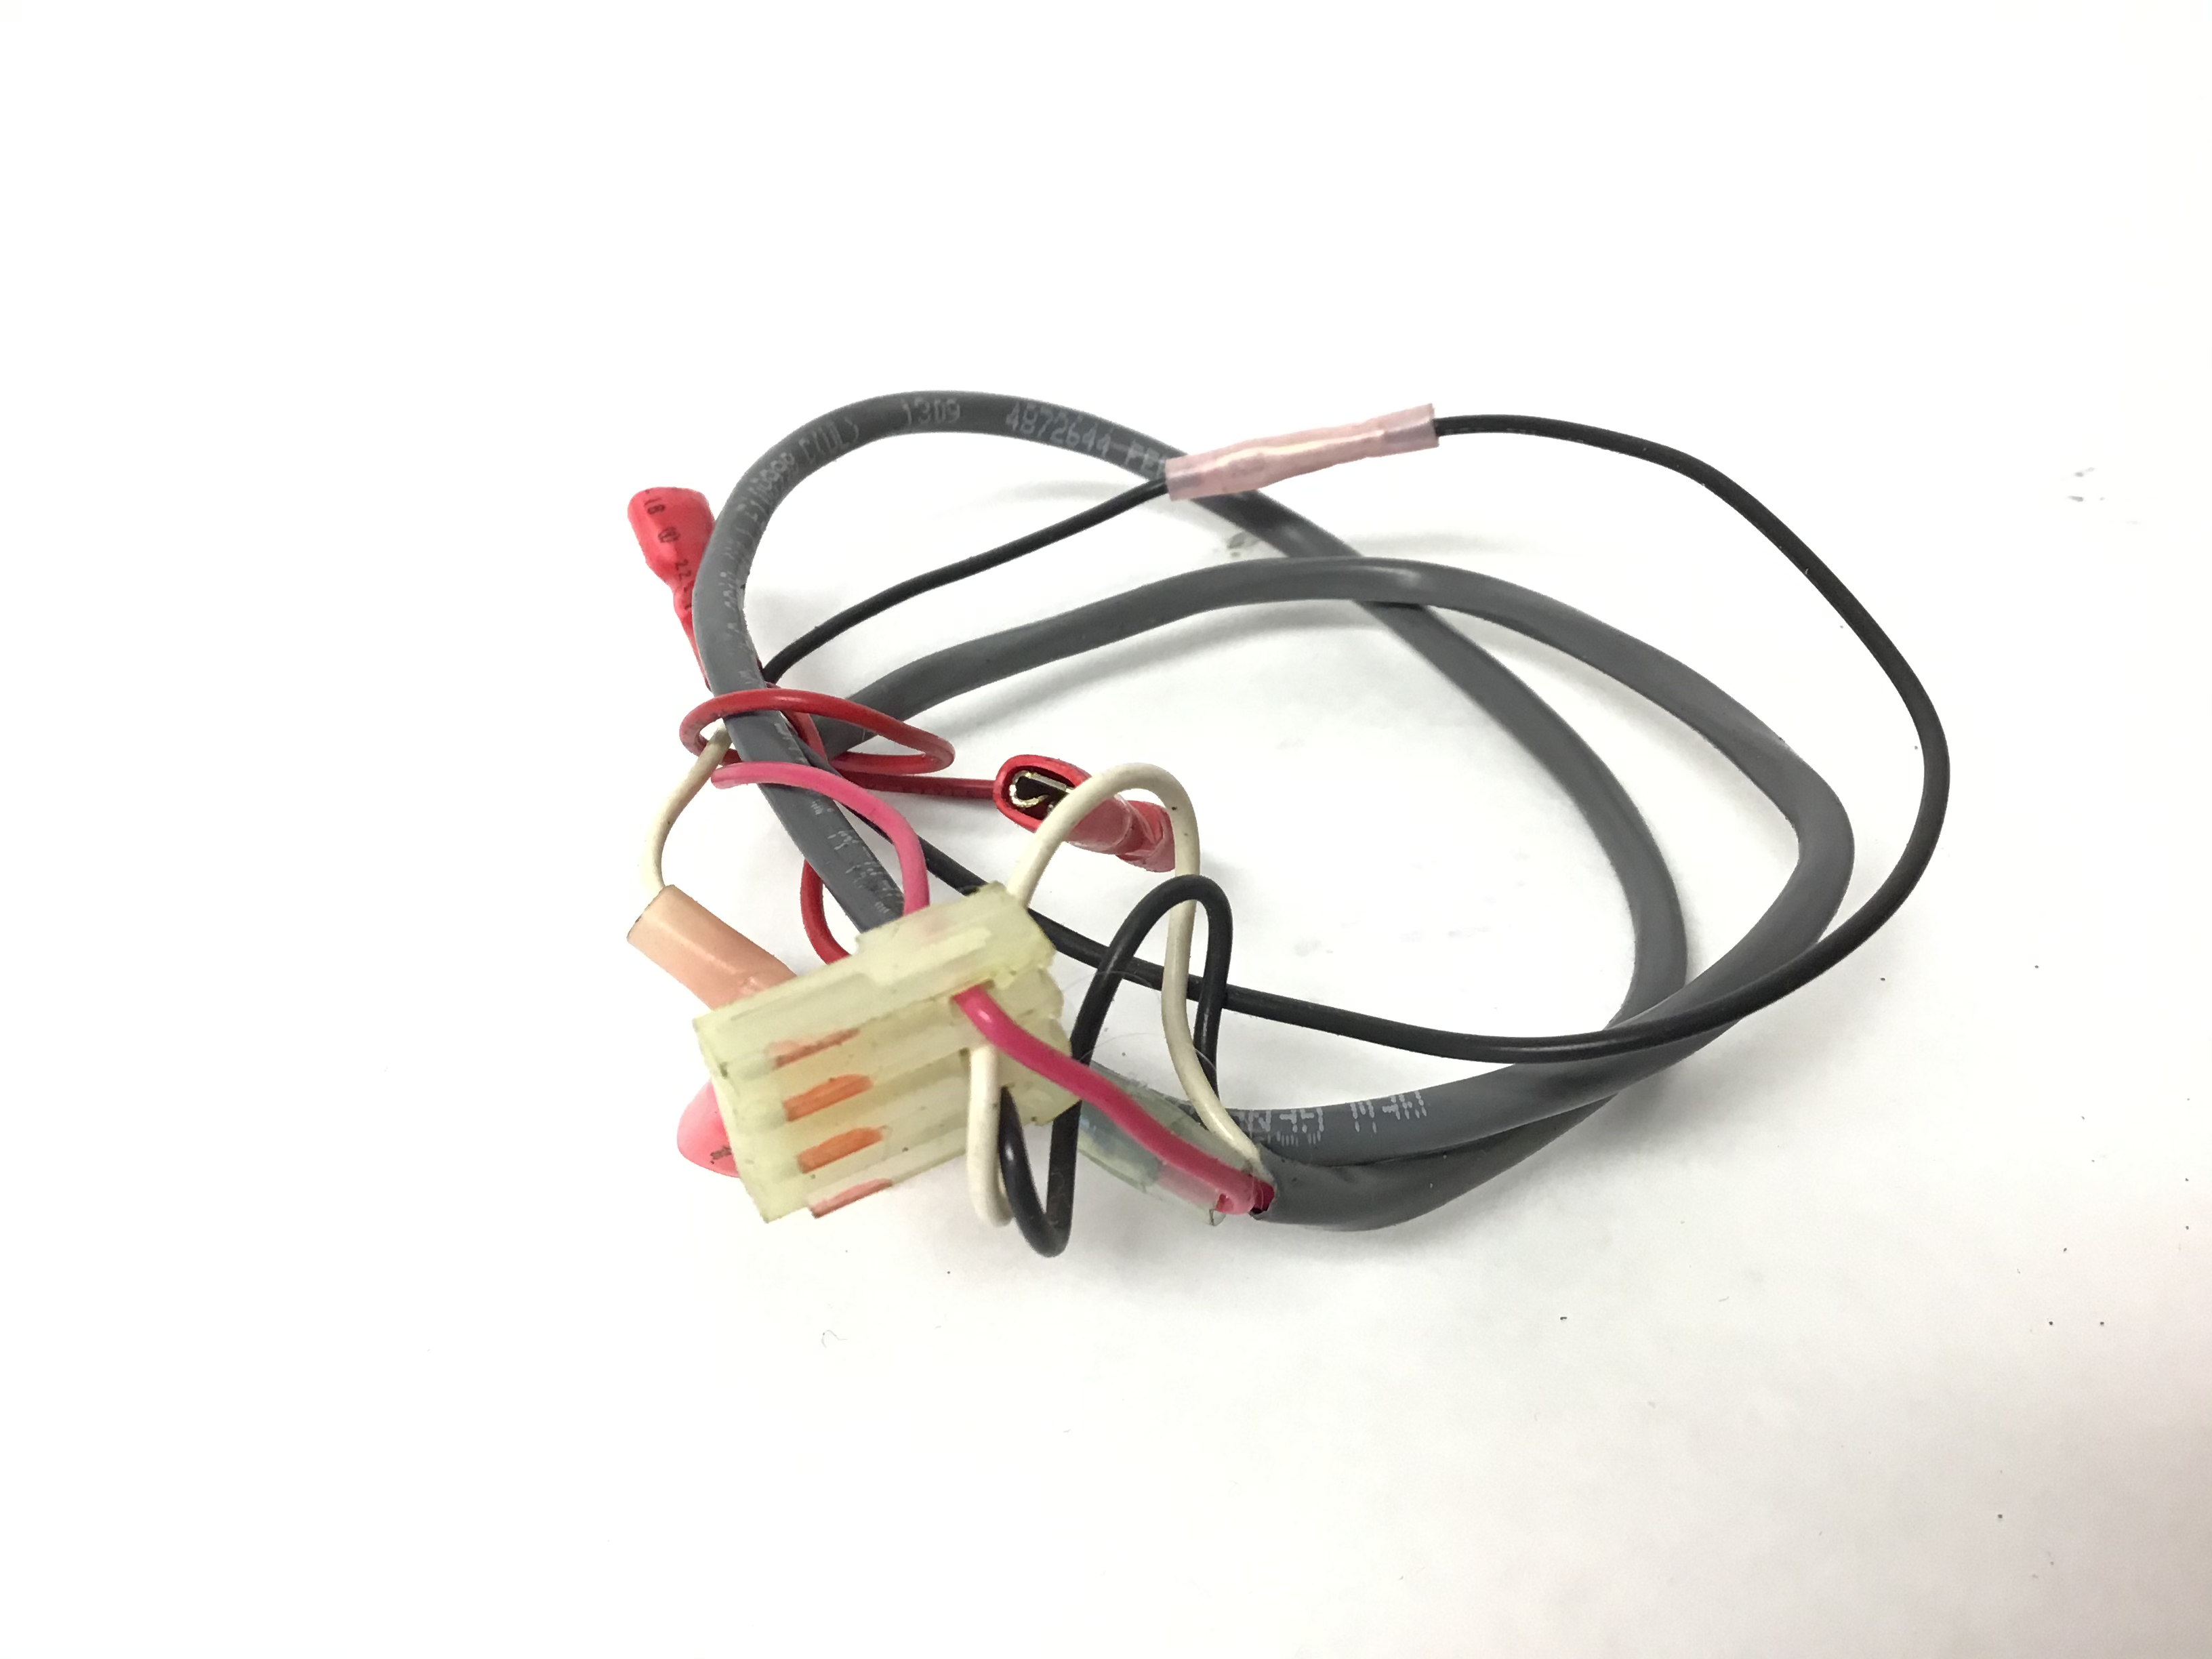 Incline Wire Harness (Used)